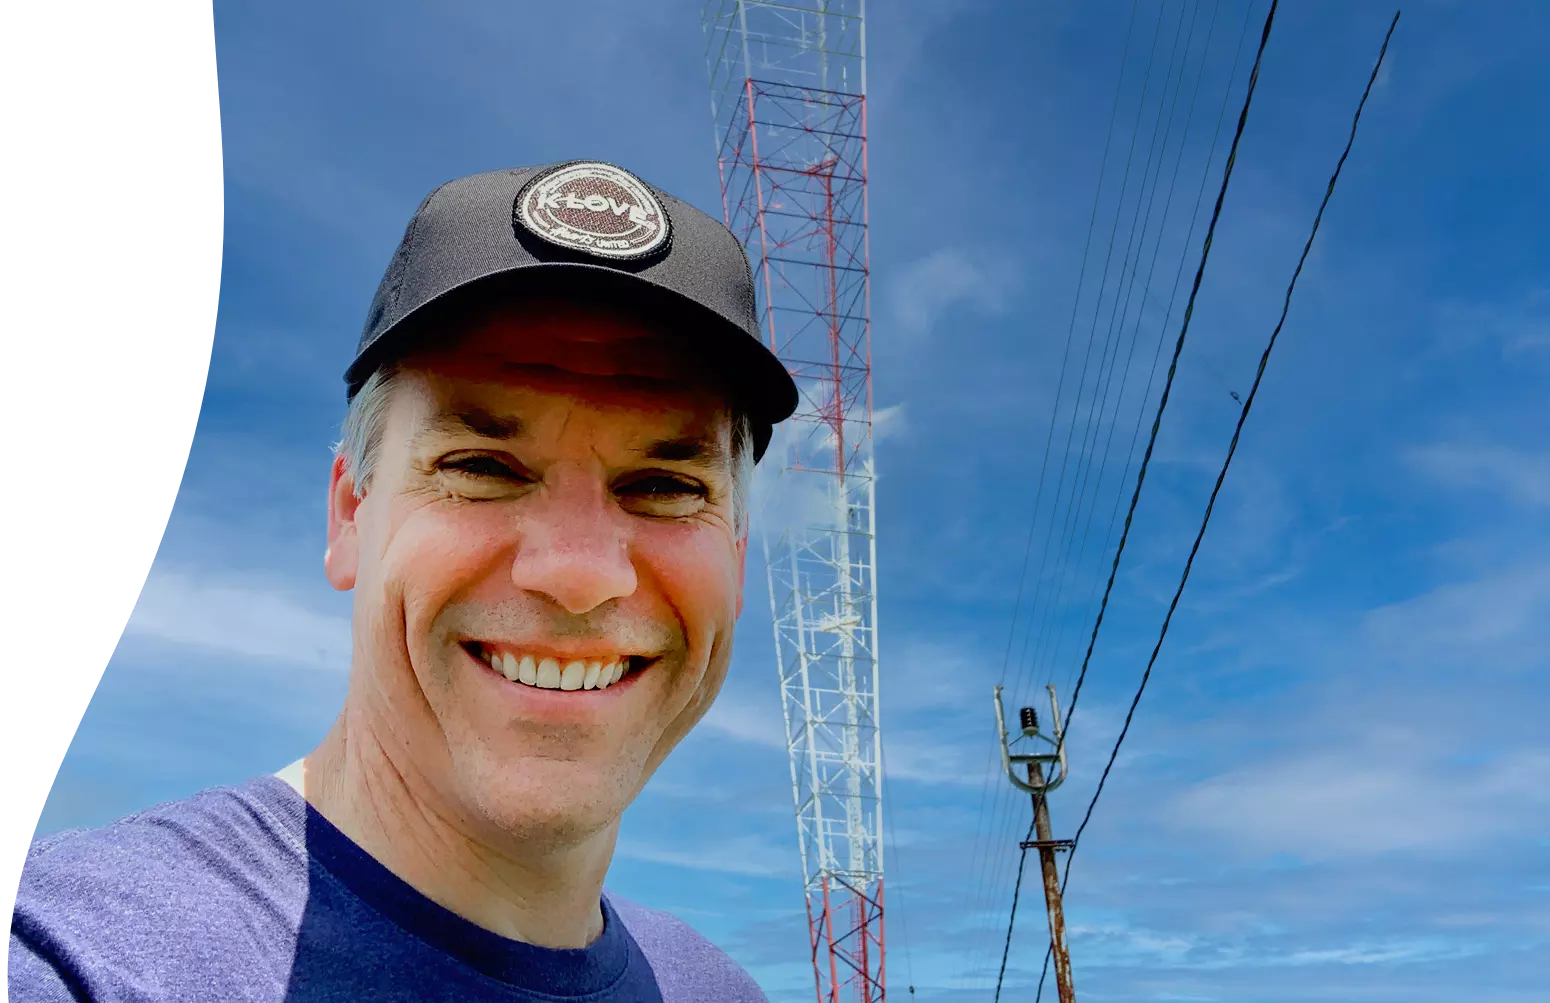 happy engineer smiling in front of a k love radio tower